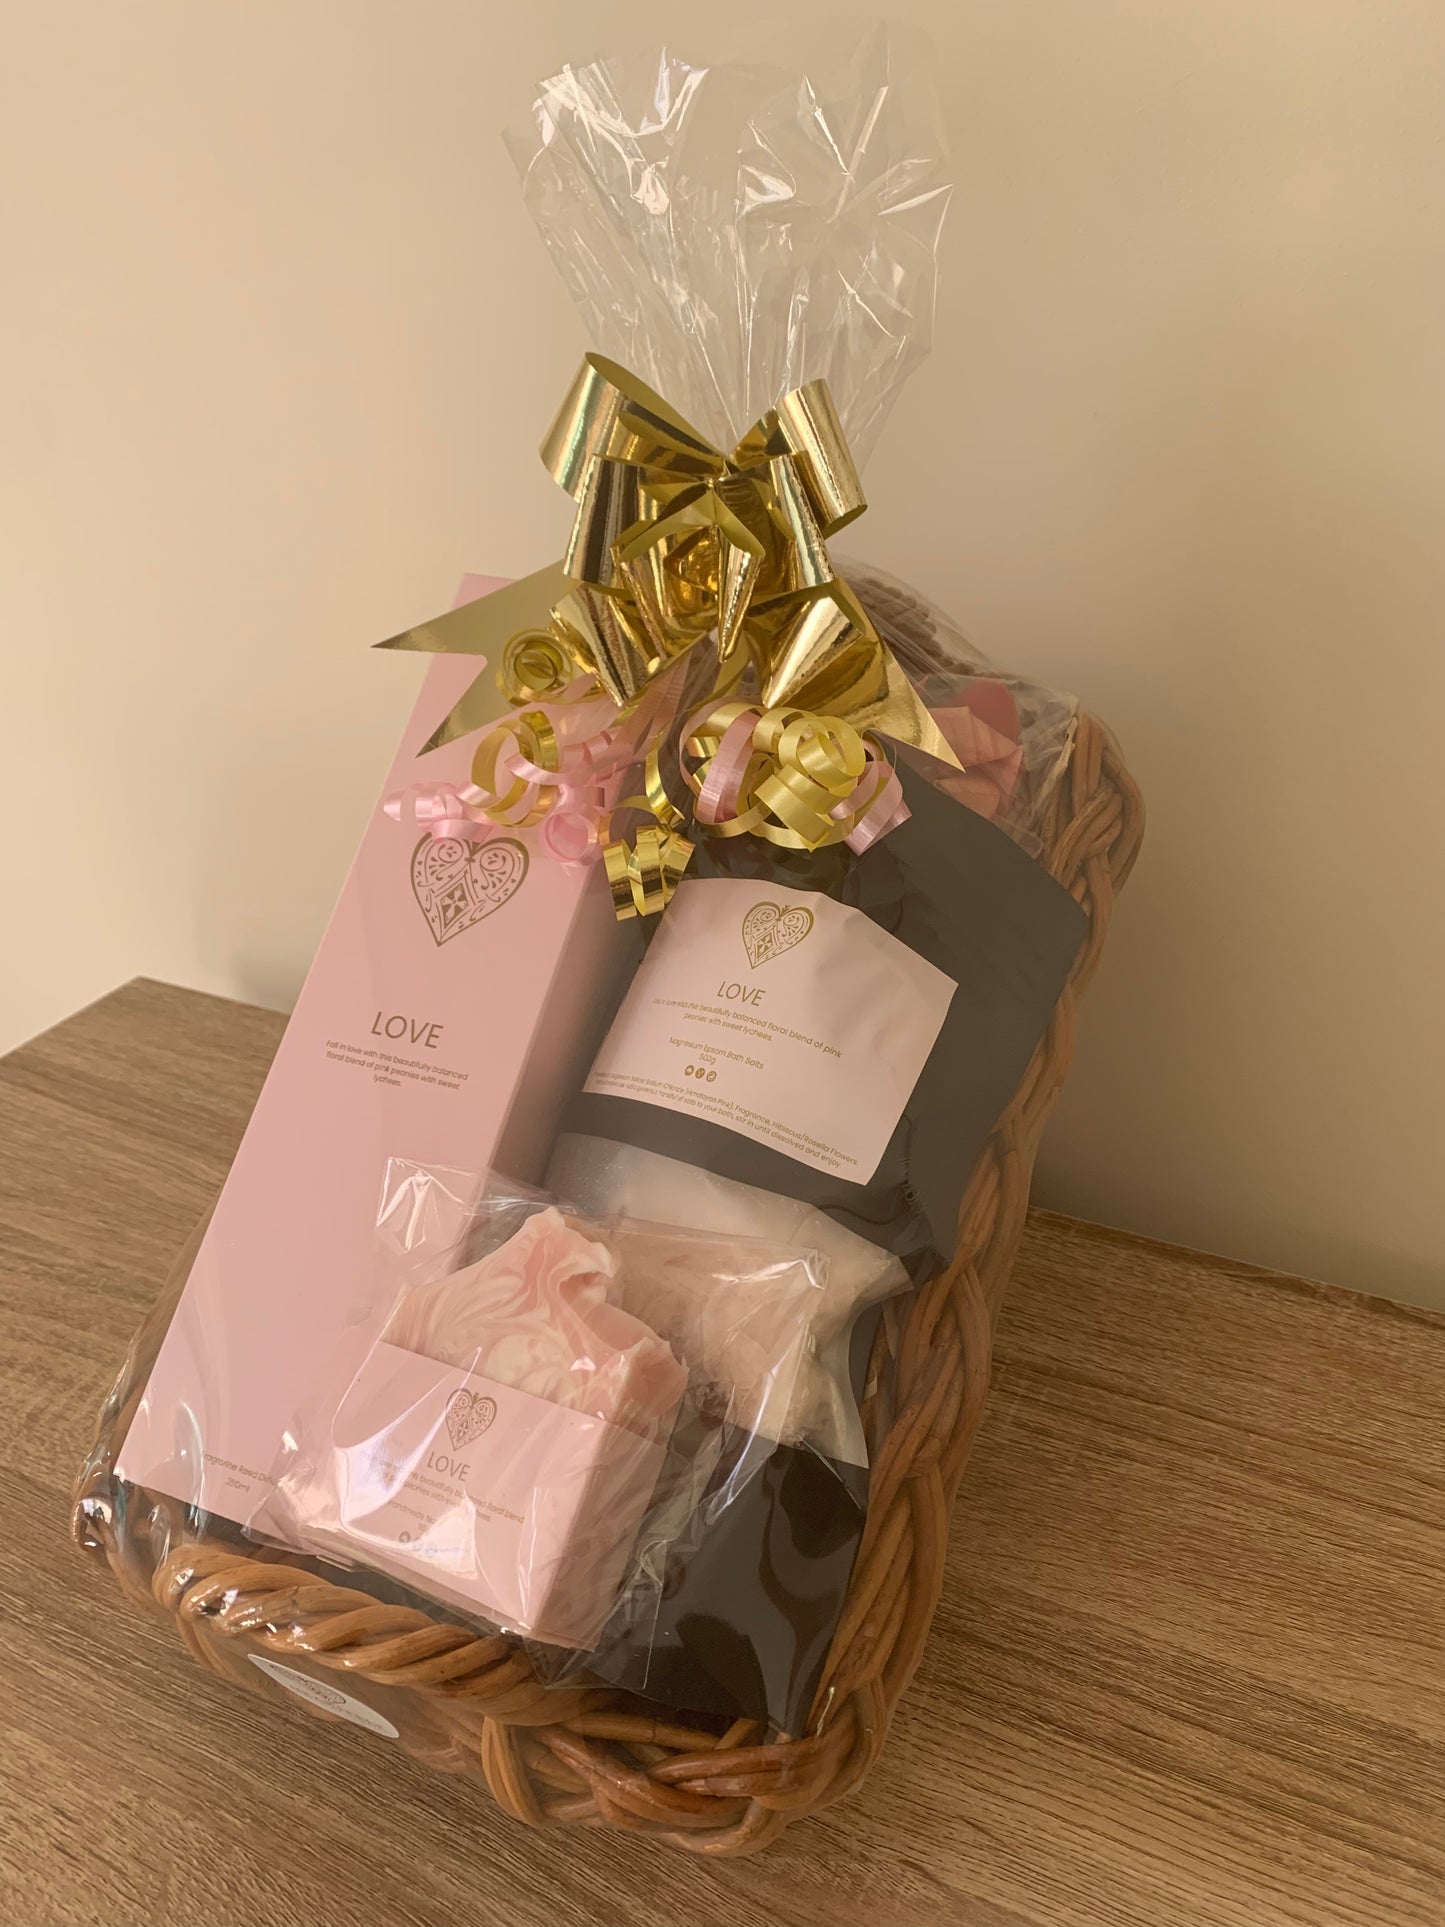 The 'Ultimate Love’ Gift Basket